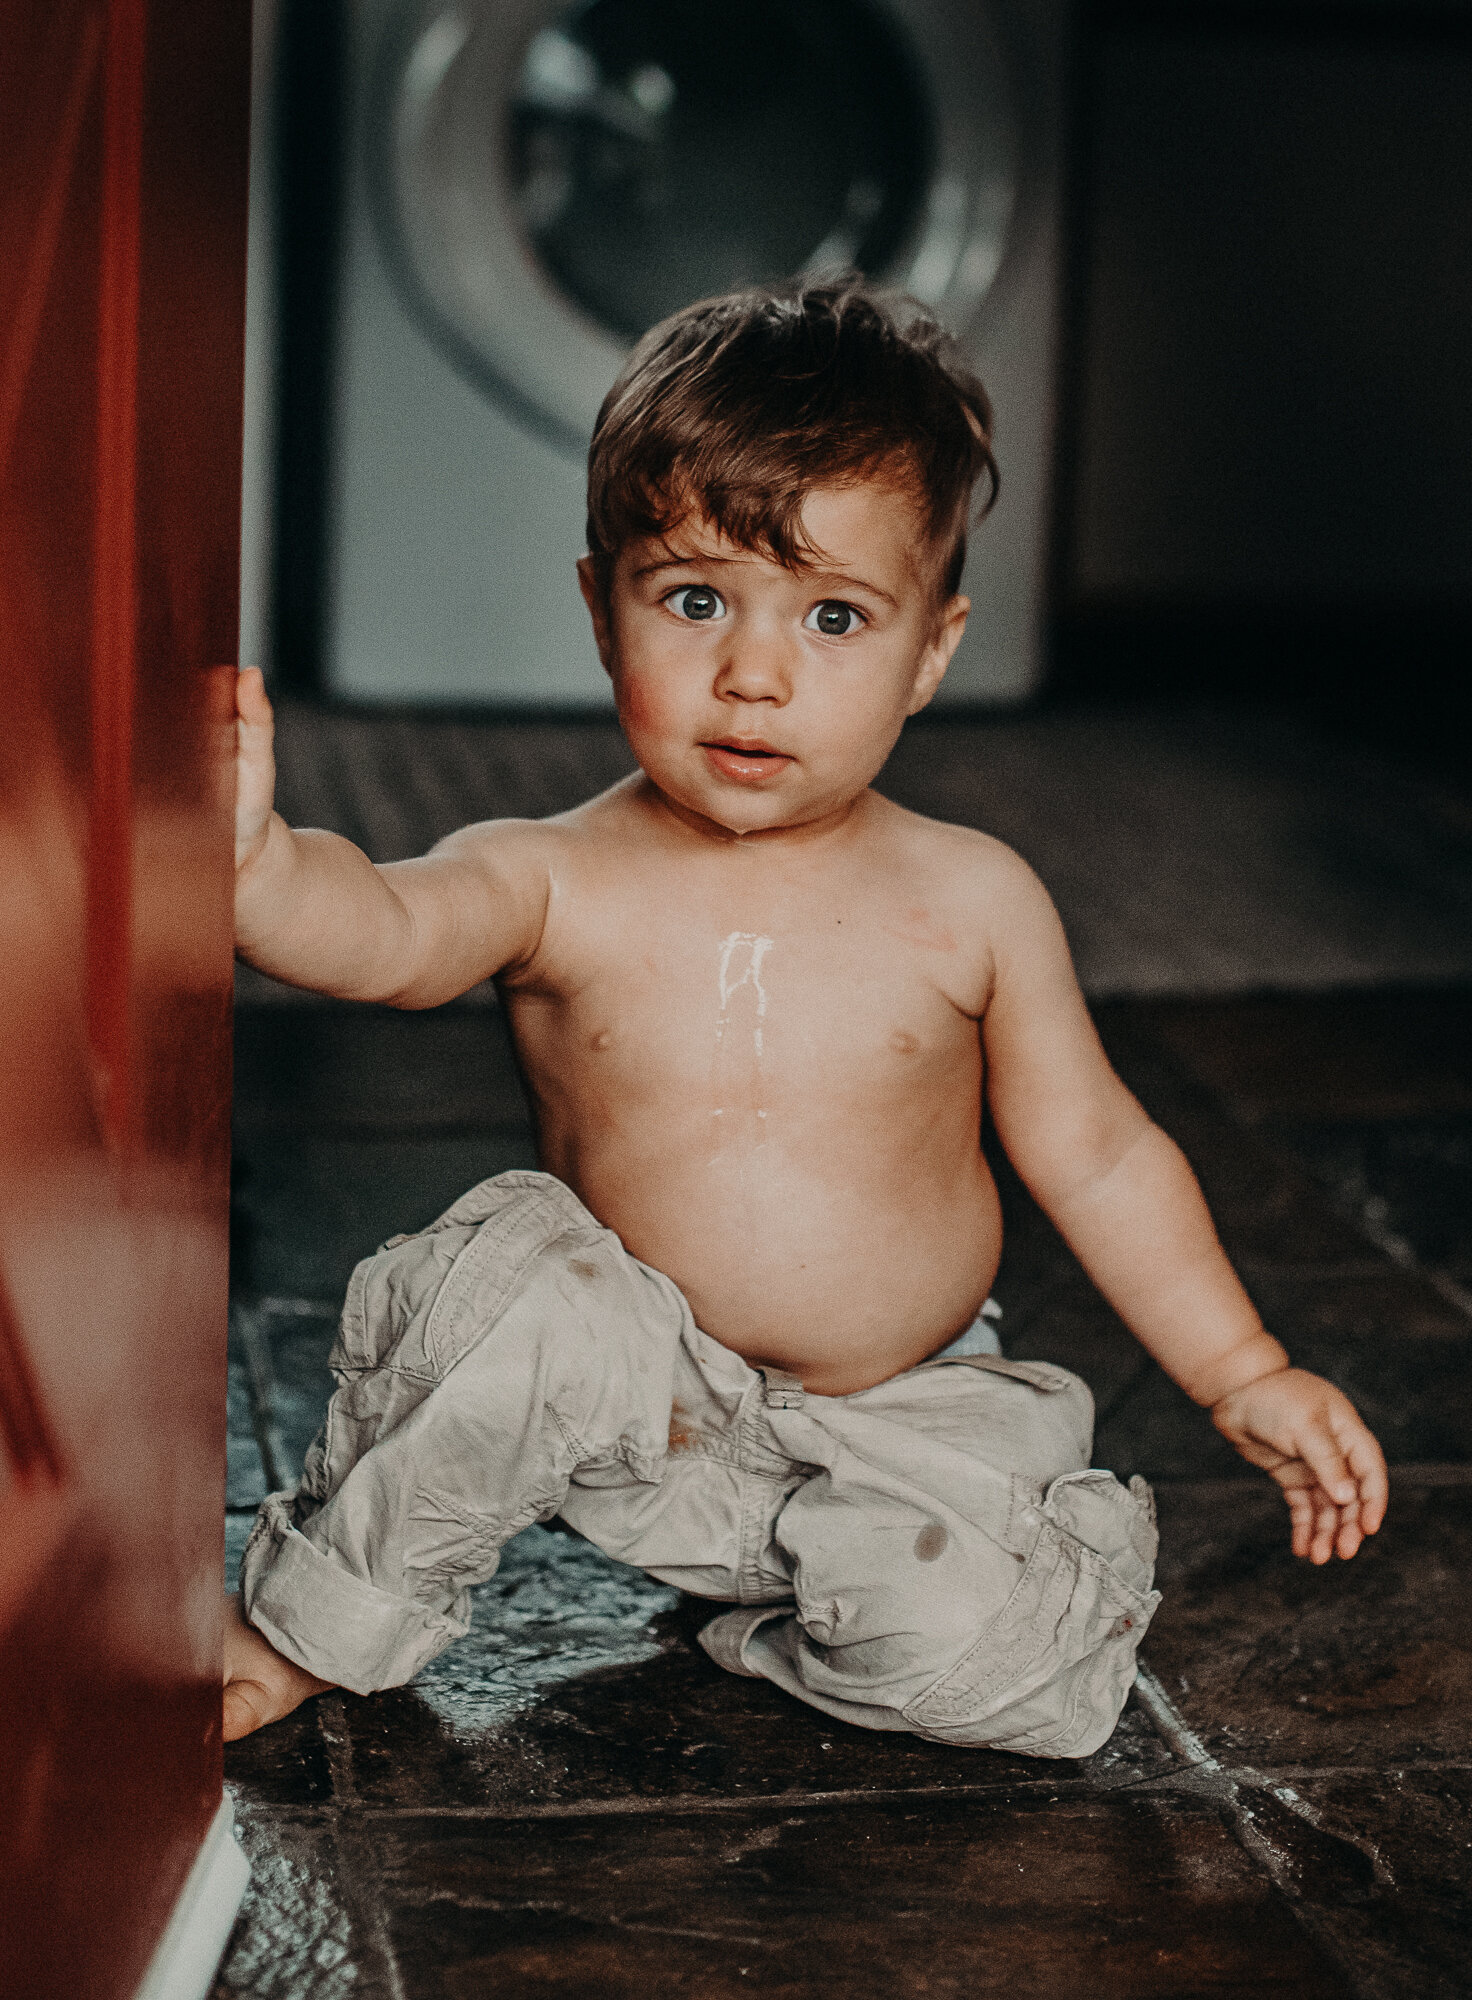 Messy cute toddler photo session in summer by Kristen Turner MacDonald.jpg